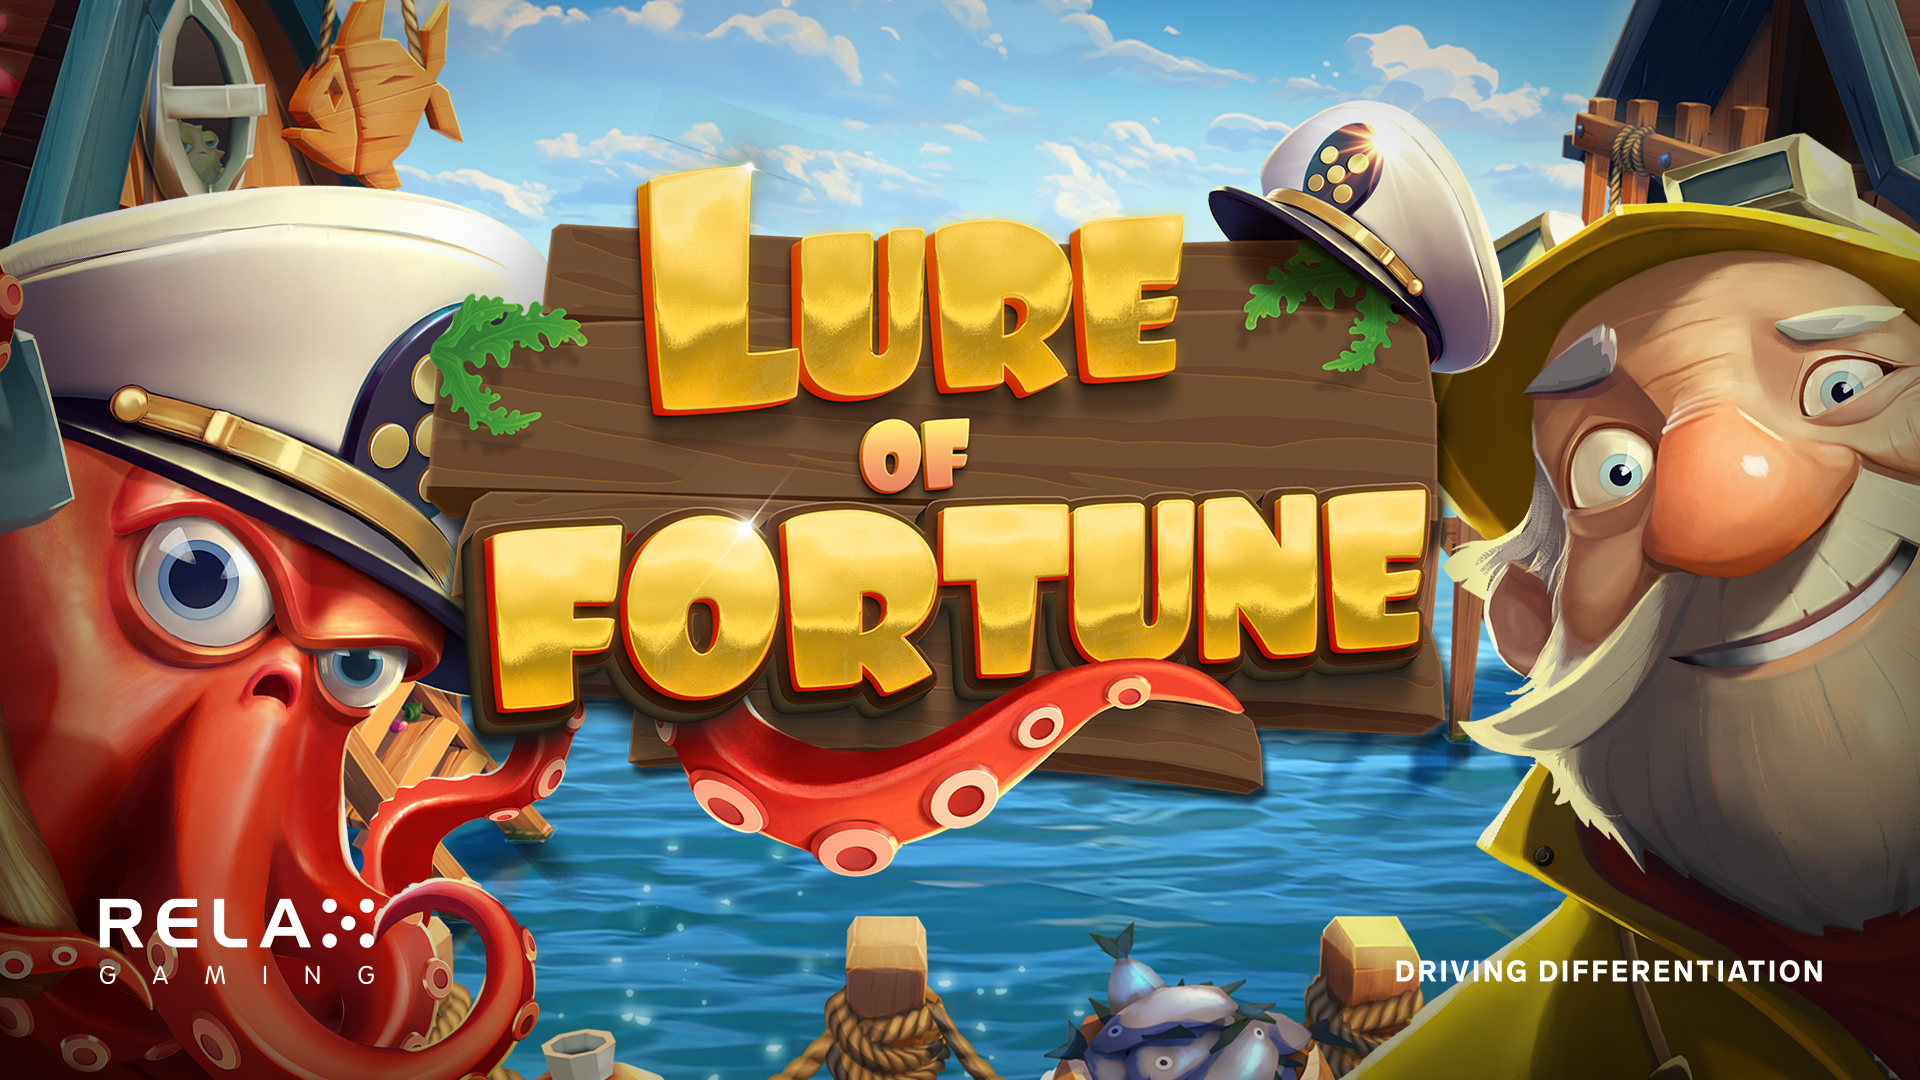 Relax Gaming’s latest release Lure of Fortune sends players on a high-octane sailing trip